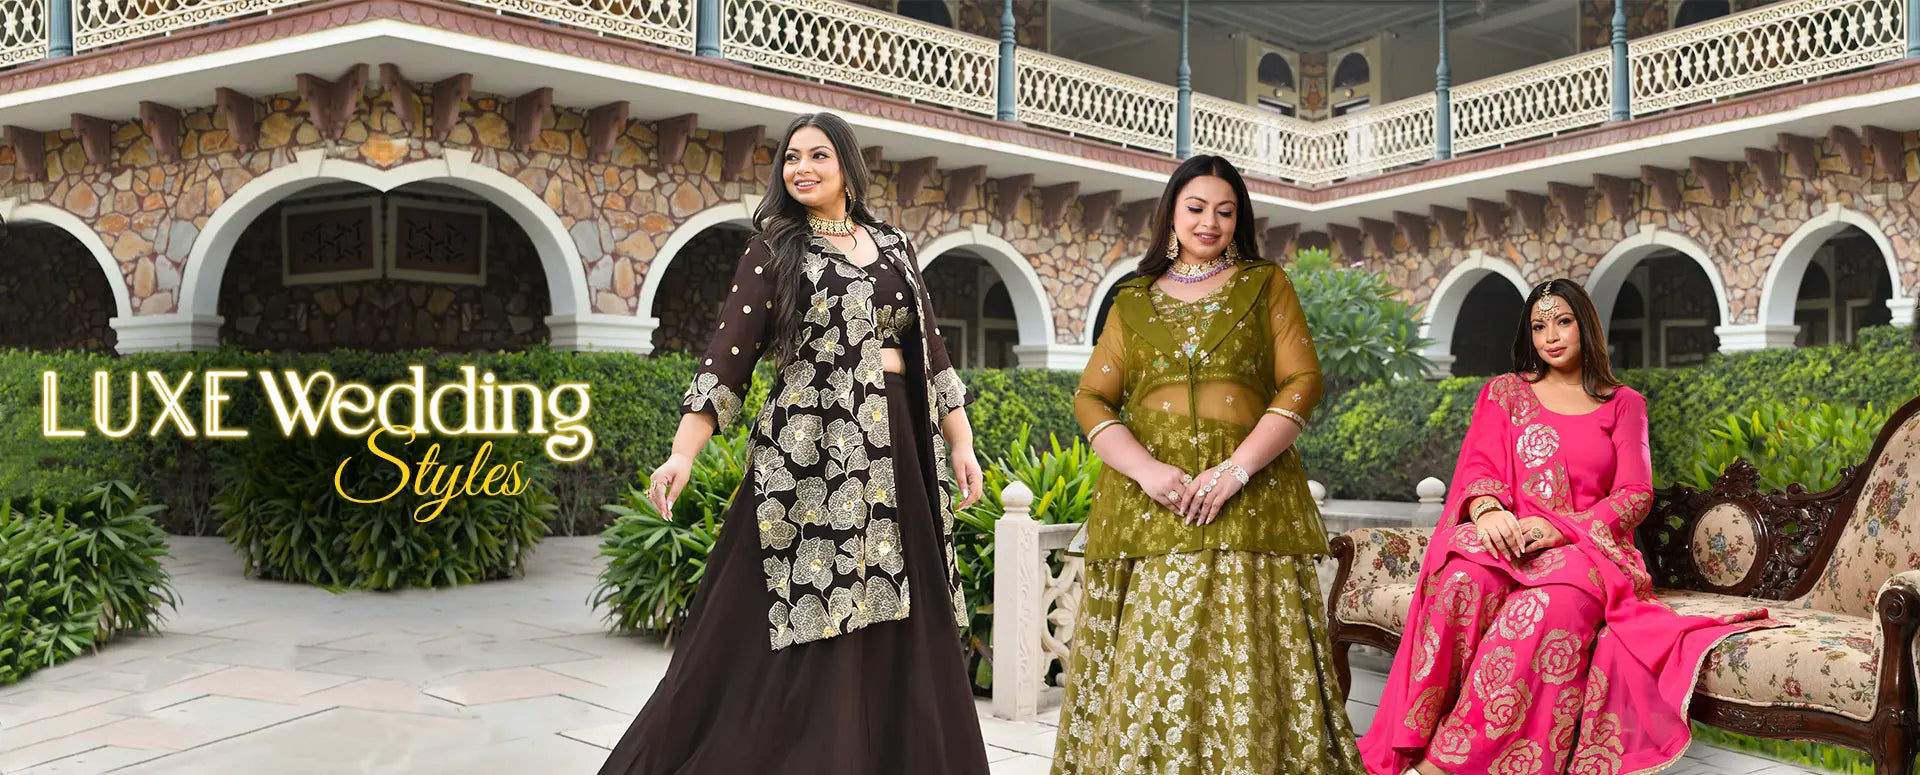 Wedding dress on rent in udaipur | Best Wedding Suits for Groom